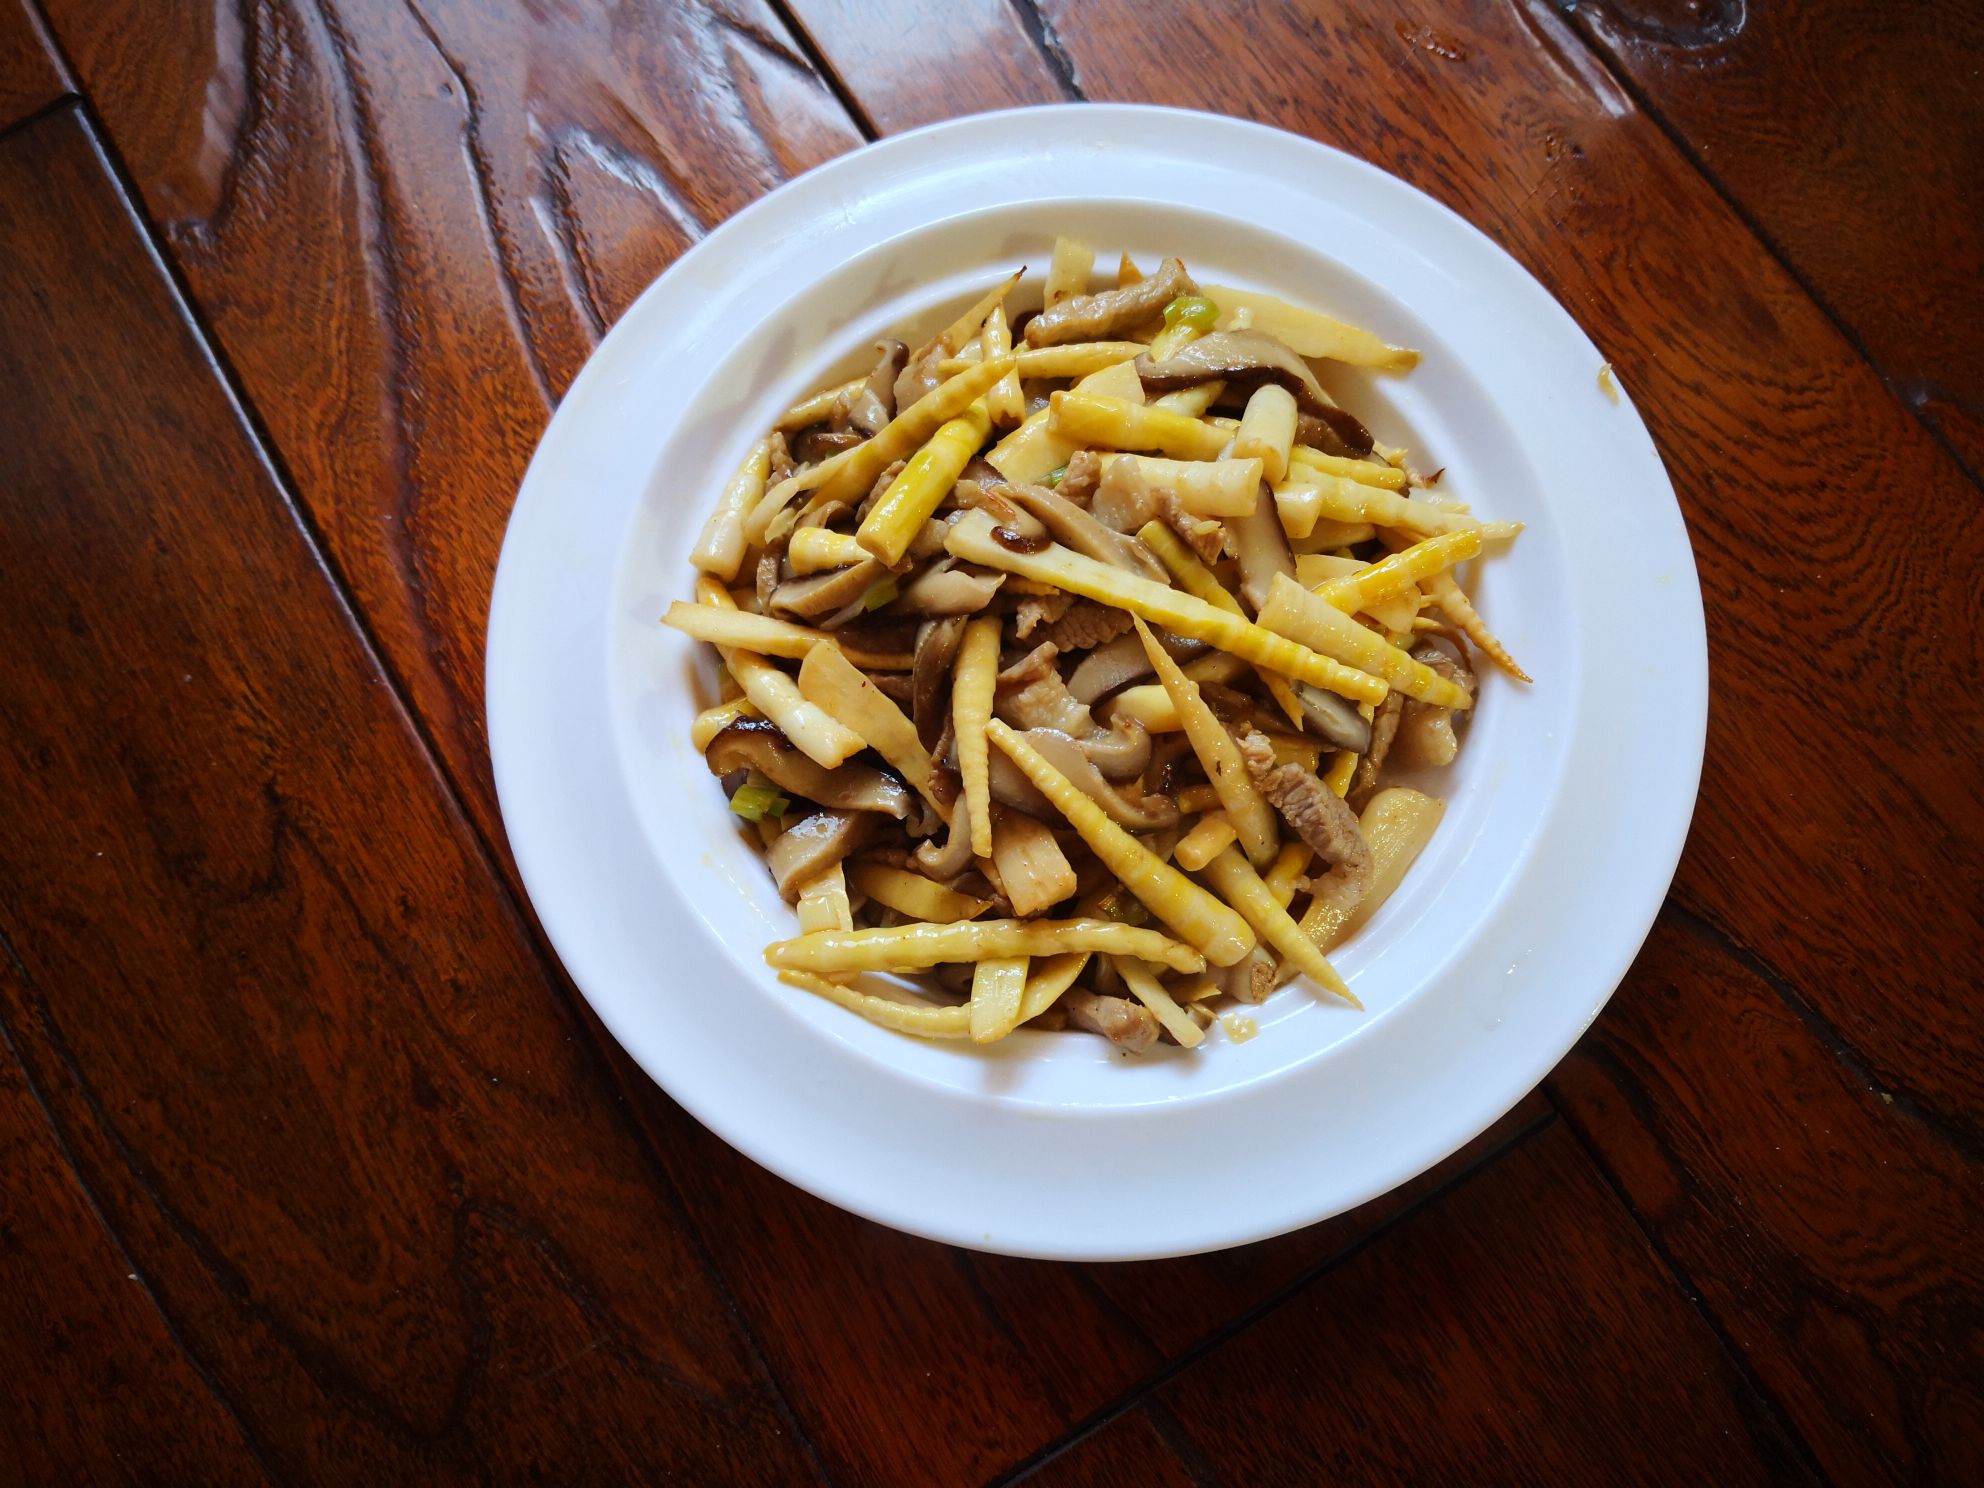 Stir-fried Shredded Pork with Mushrooms and Bamboo Shoots recipe